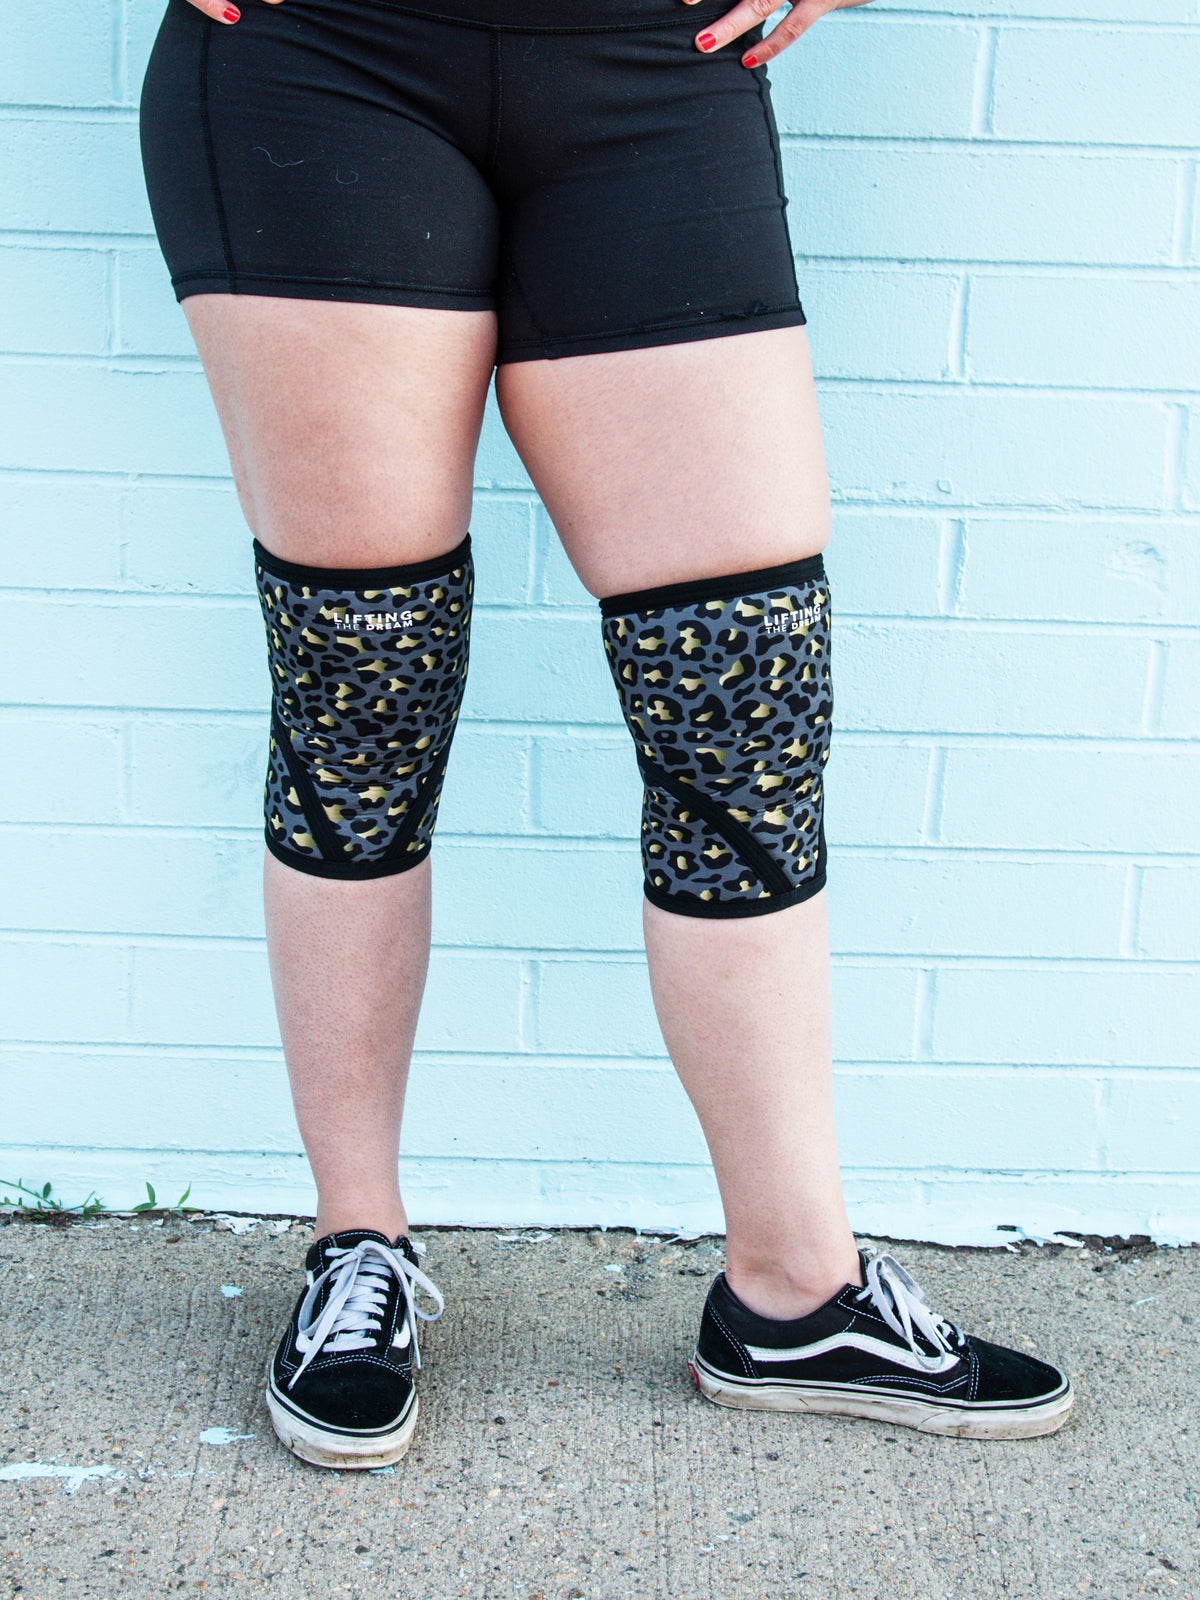 Lucky Leopard Knee Sleeves